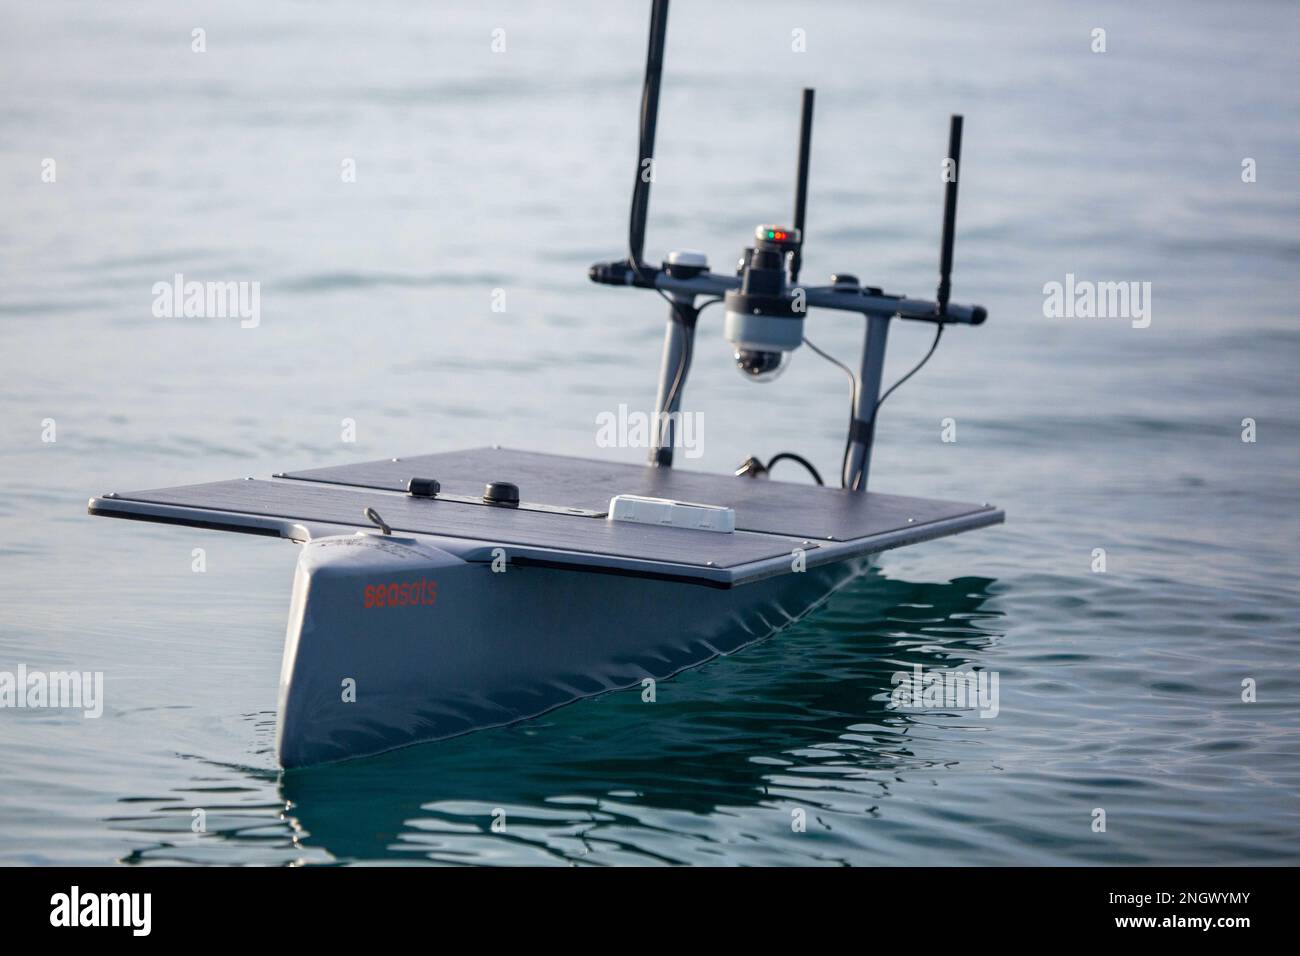 221129-A-RY768-2015 ARABIAN GULF (Nov. 29, 2022) A Seasats X3 unmanned surface vessel operates in the Arabian Gulf, Nov. 29, during Digital Horizon 2022. The three-week unmanned and artificial intelligence integration event involves employing new platforms in the region for the first time. Stock Photo